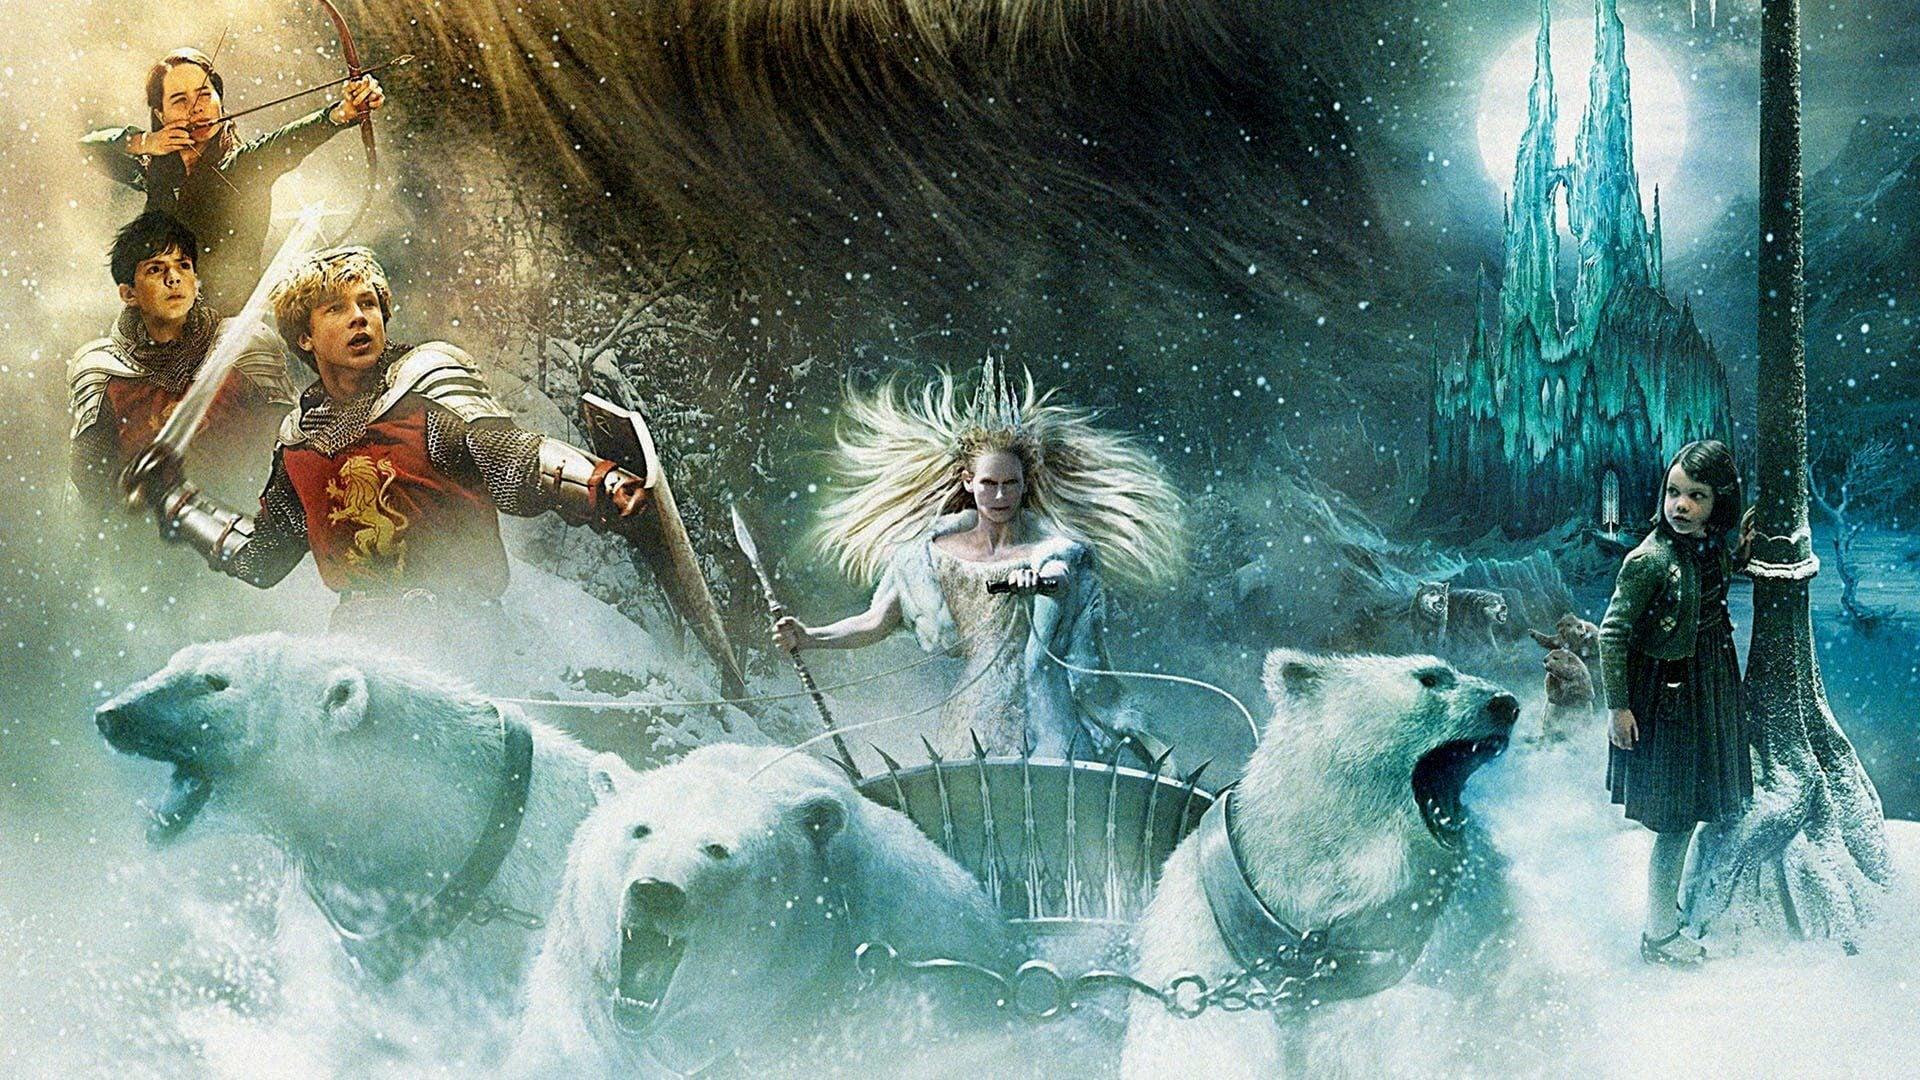 The Chronicles of Narnia: The Lion, the Witch and the Wardrobe backdrop